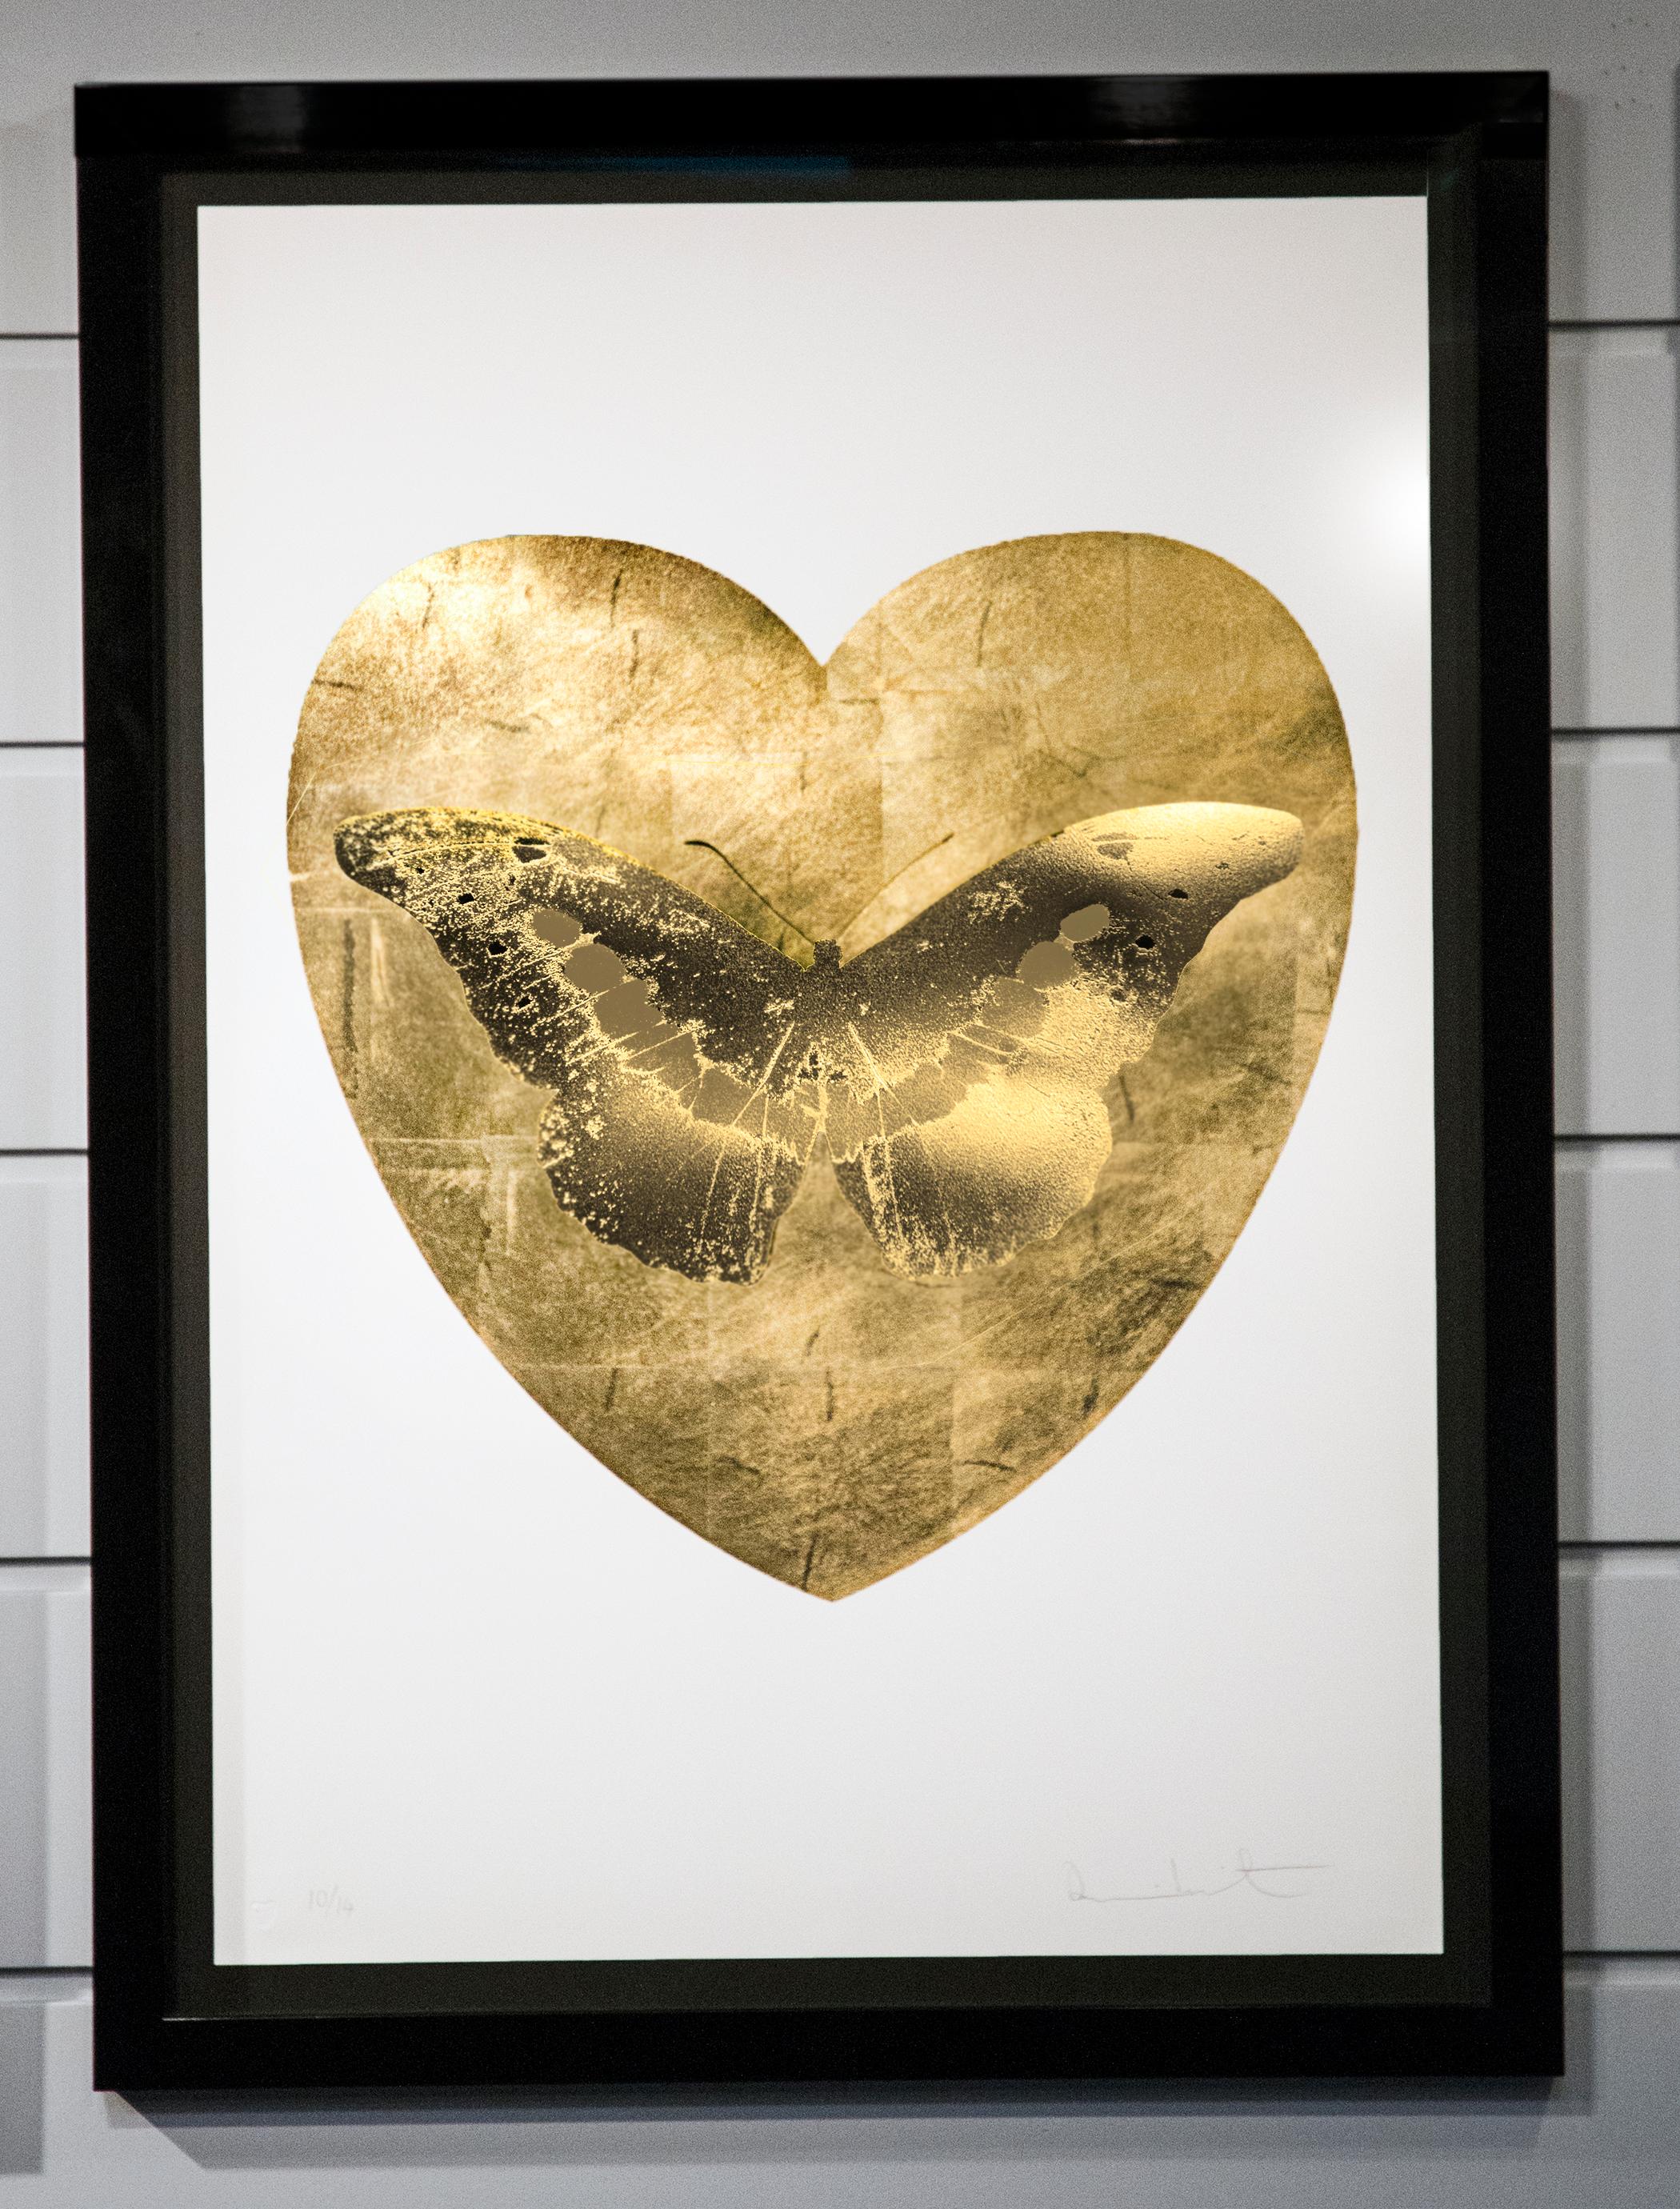 This series 'I Love You' is created in Damien Hirst's signature style using butterflies as a symbolism for the celebration of life. This particular work is stunning with the tonal gold butterfly set on a gold leaf foil-block heart. Exclusive edition